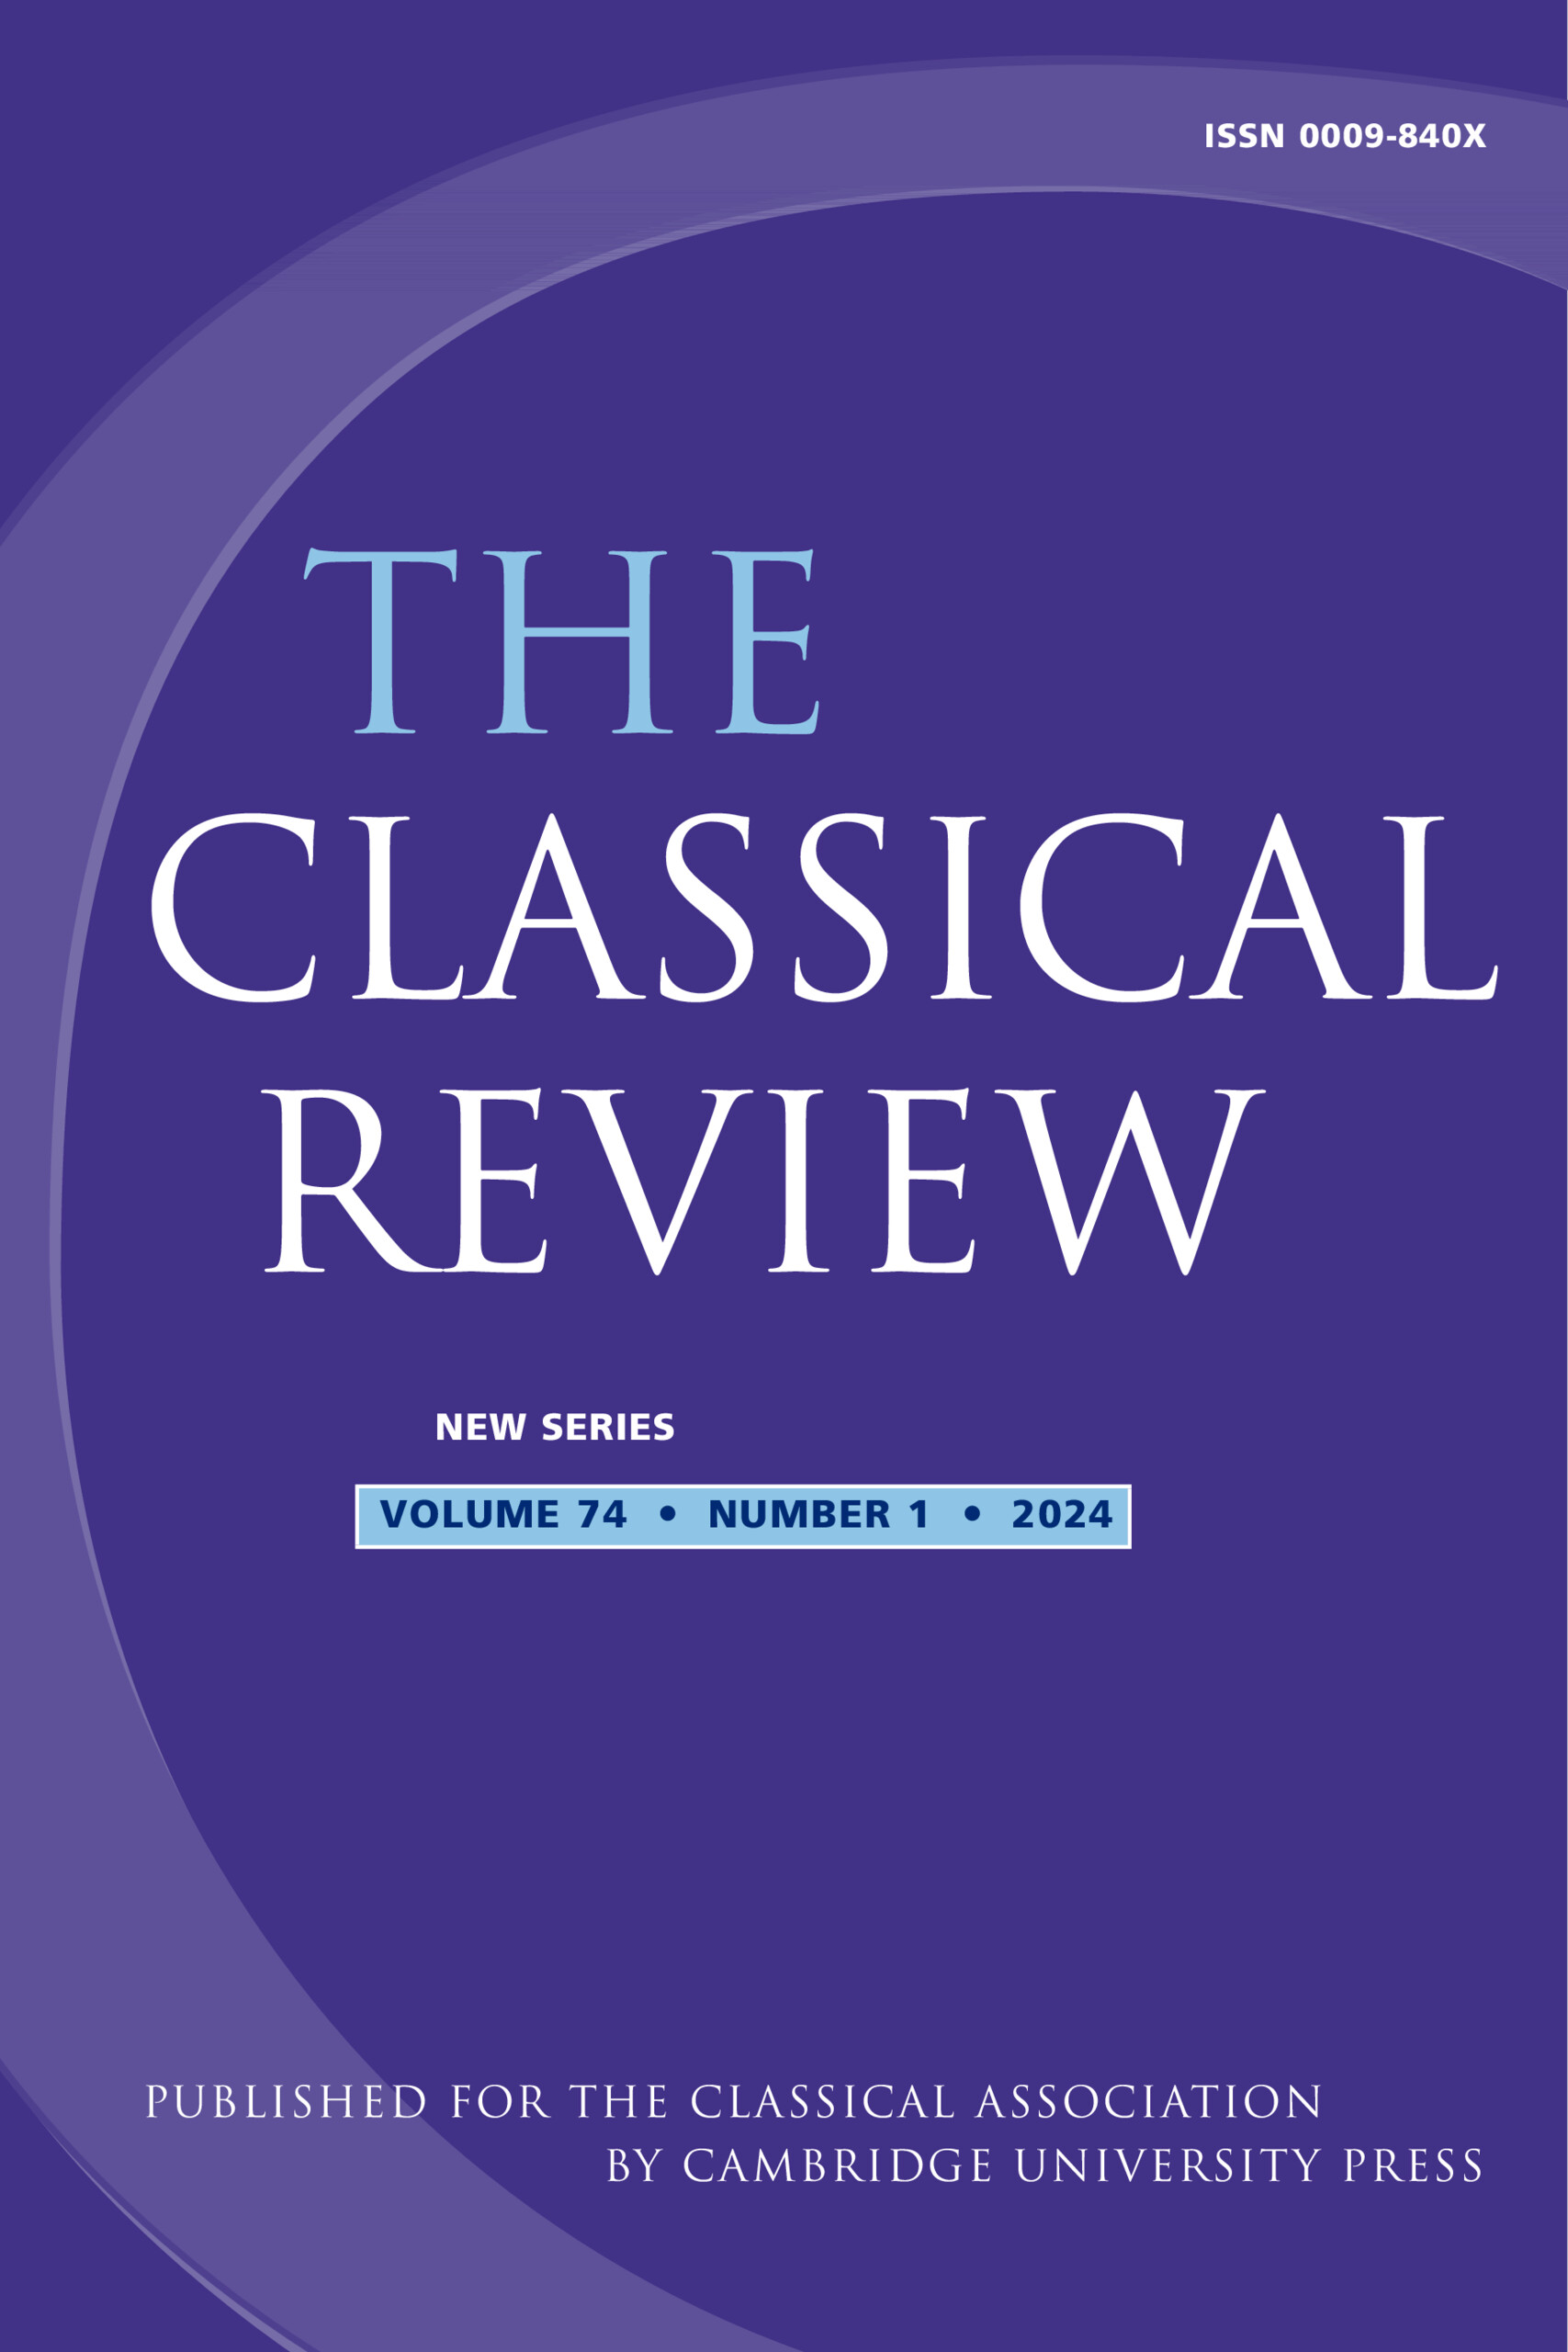 The Classical Review   Cambridge Core